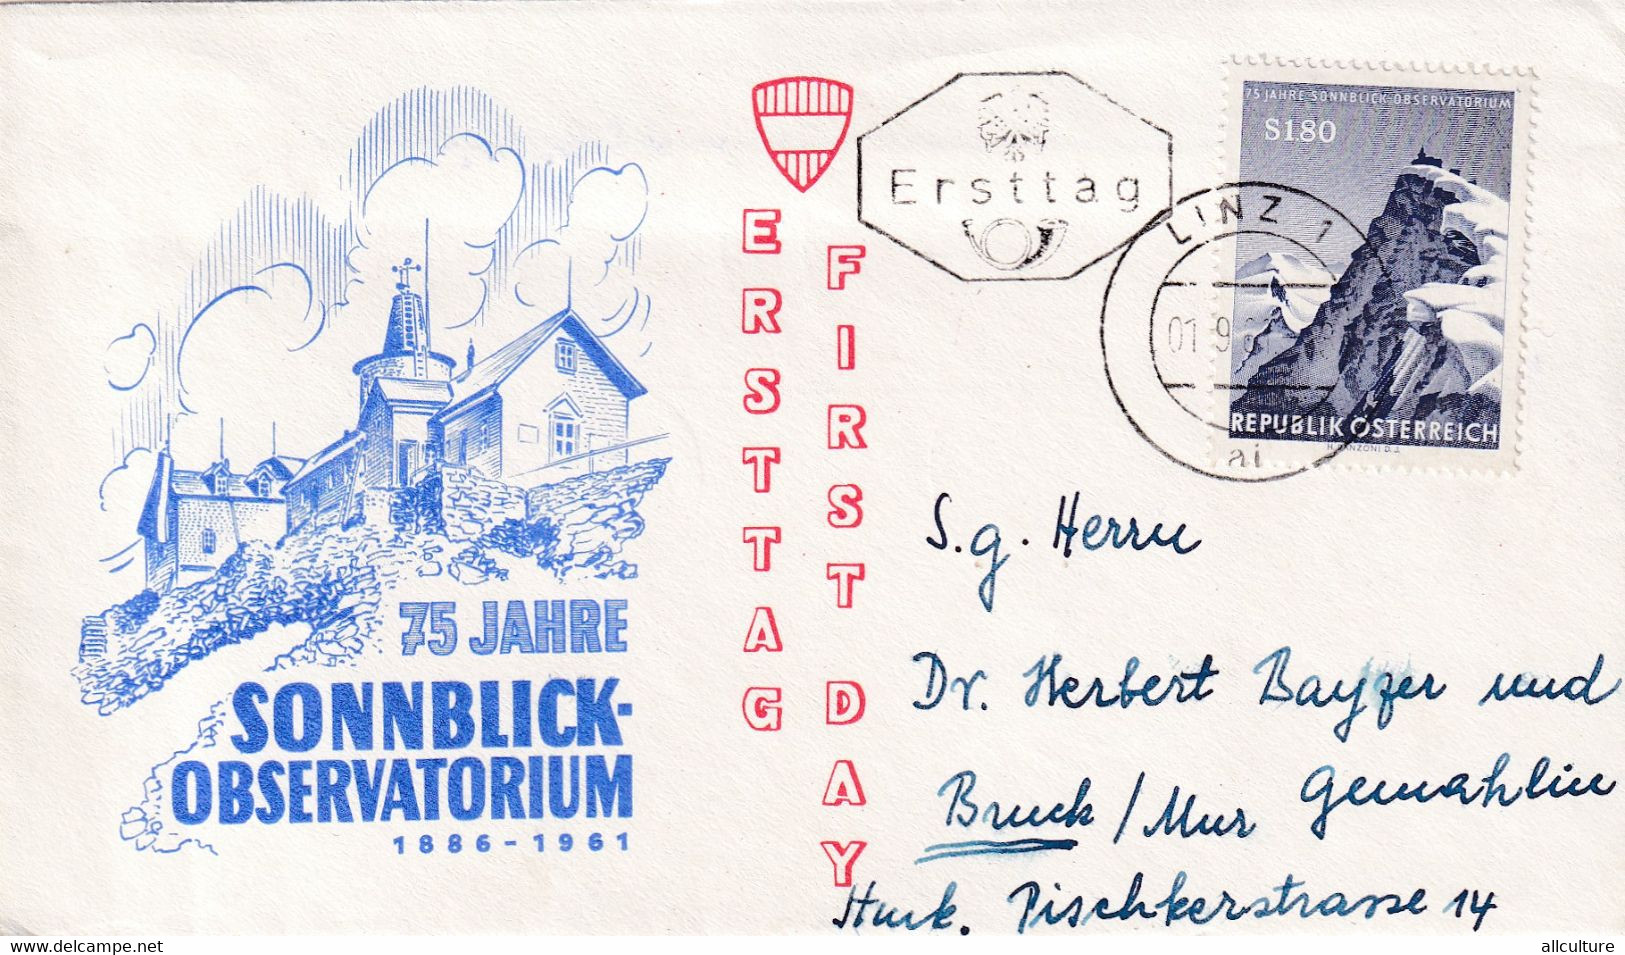 A8384- SONNBLICK OBSERVATORIUM ERSTTAG 1886-1961, LINZ 1961 REPUBLIK OESTERREICH USED STAMP ON COVER - Covers & Documents